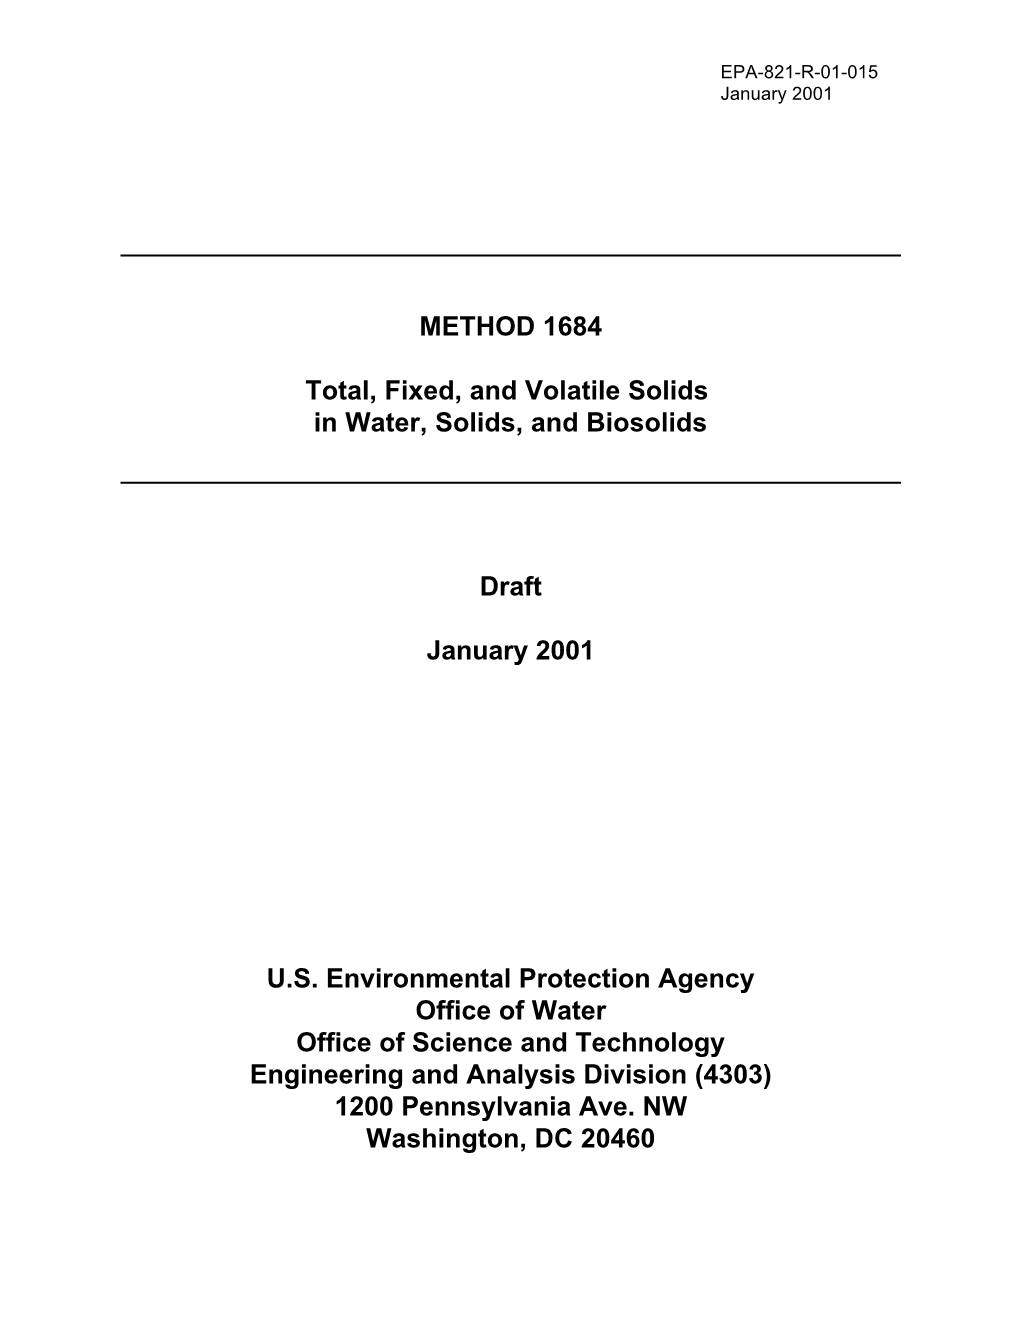 1684: Total, Fixed, and Volatile Solids in Water, Solids, and Biosolids